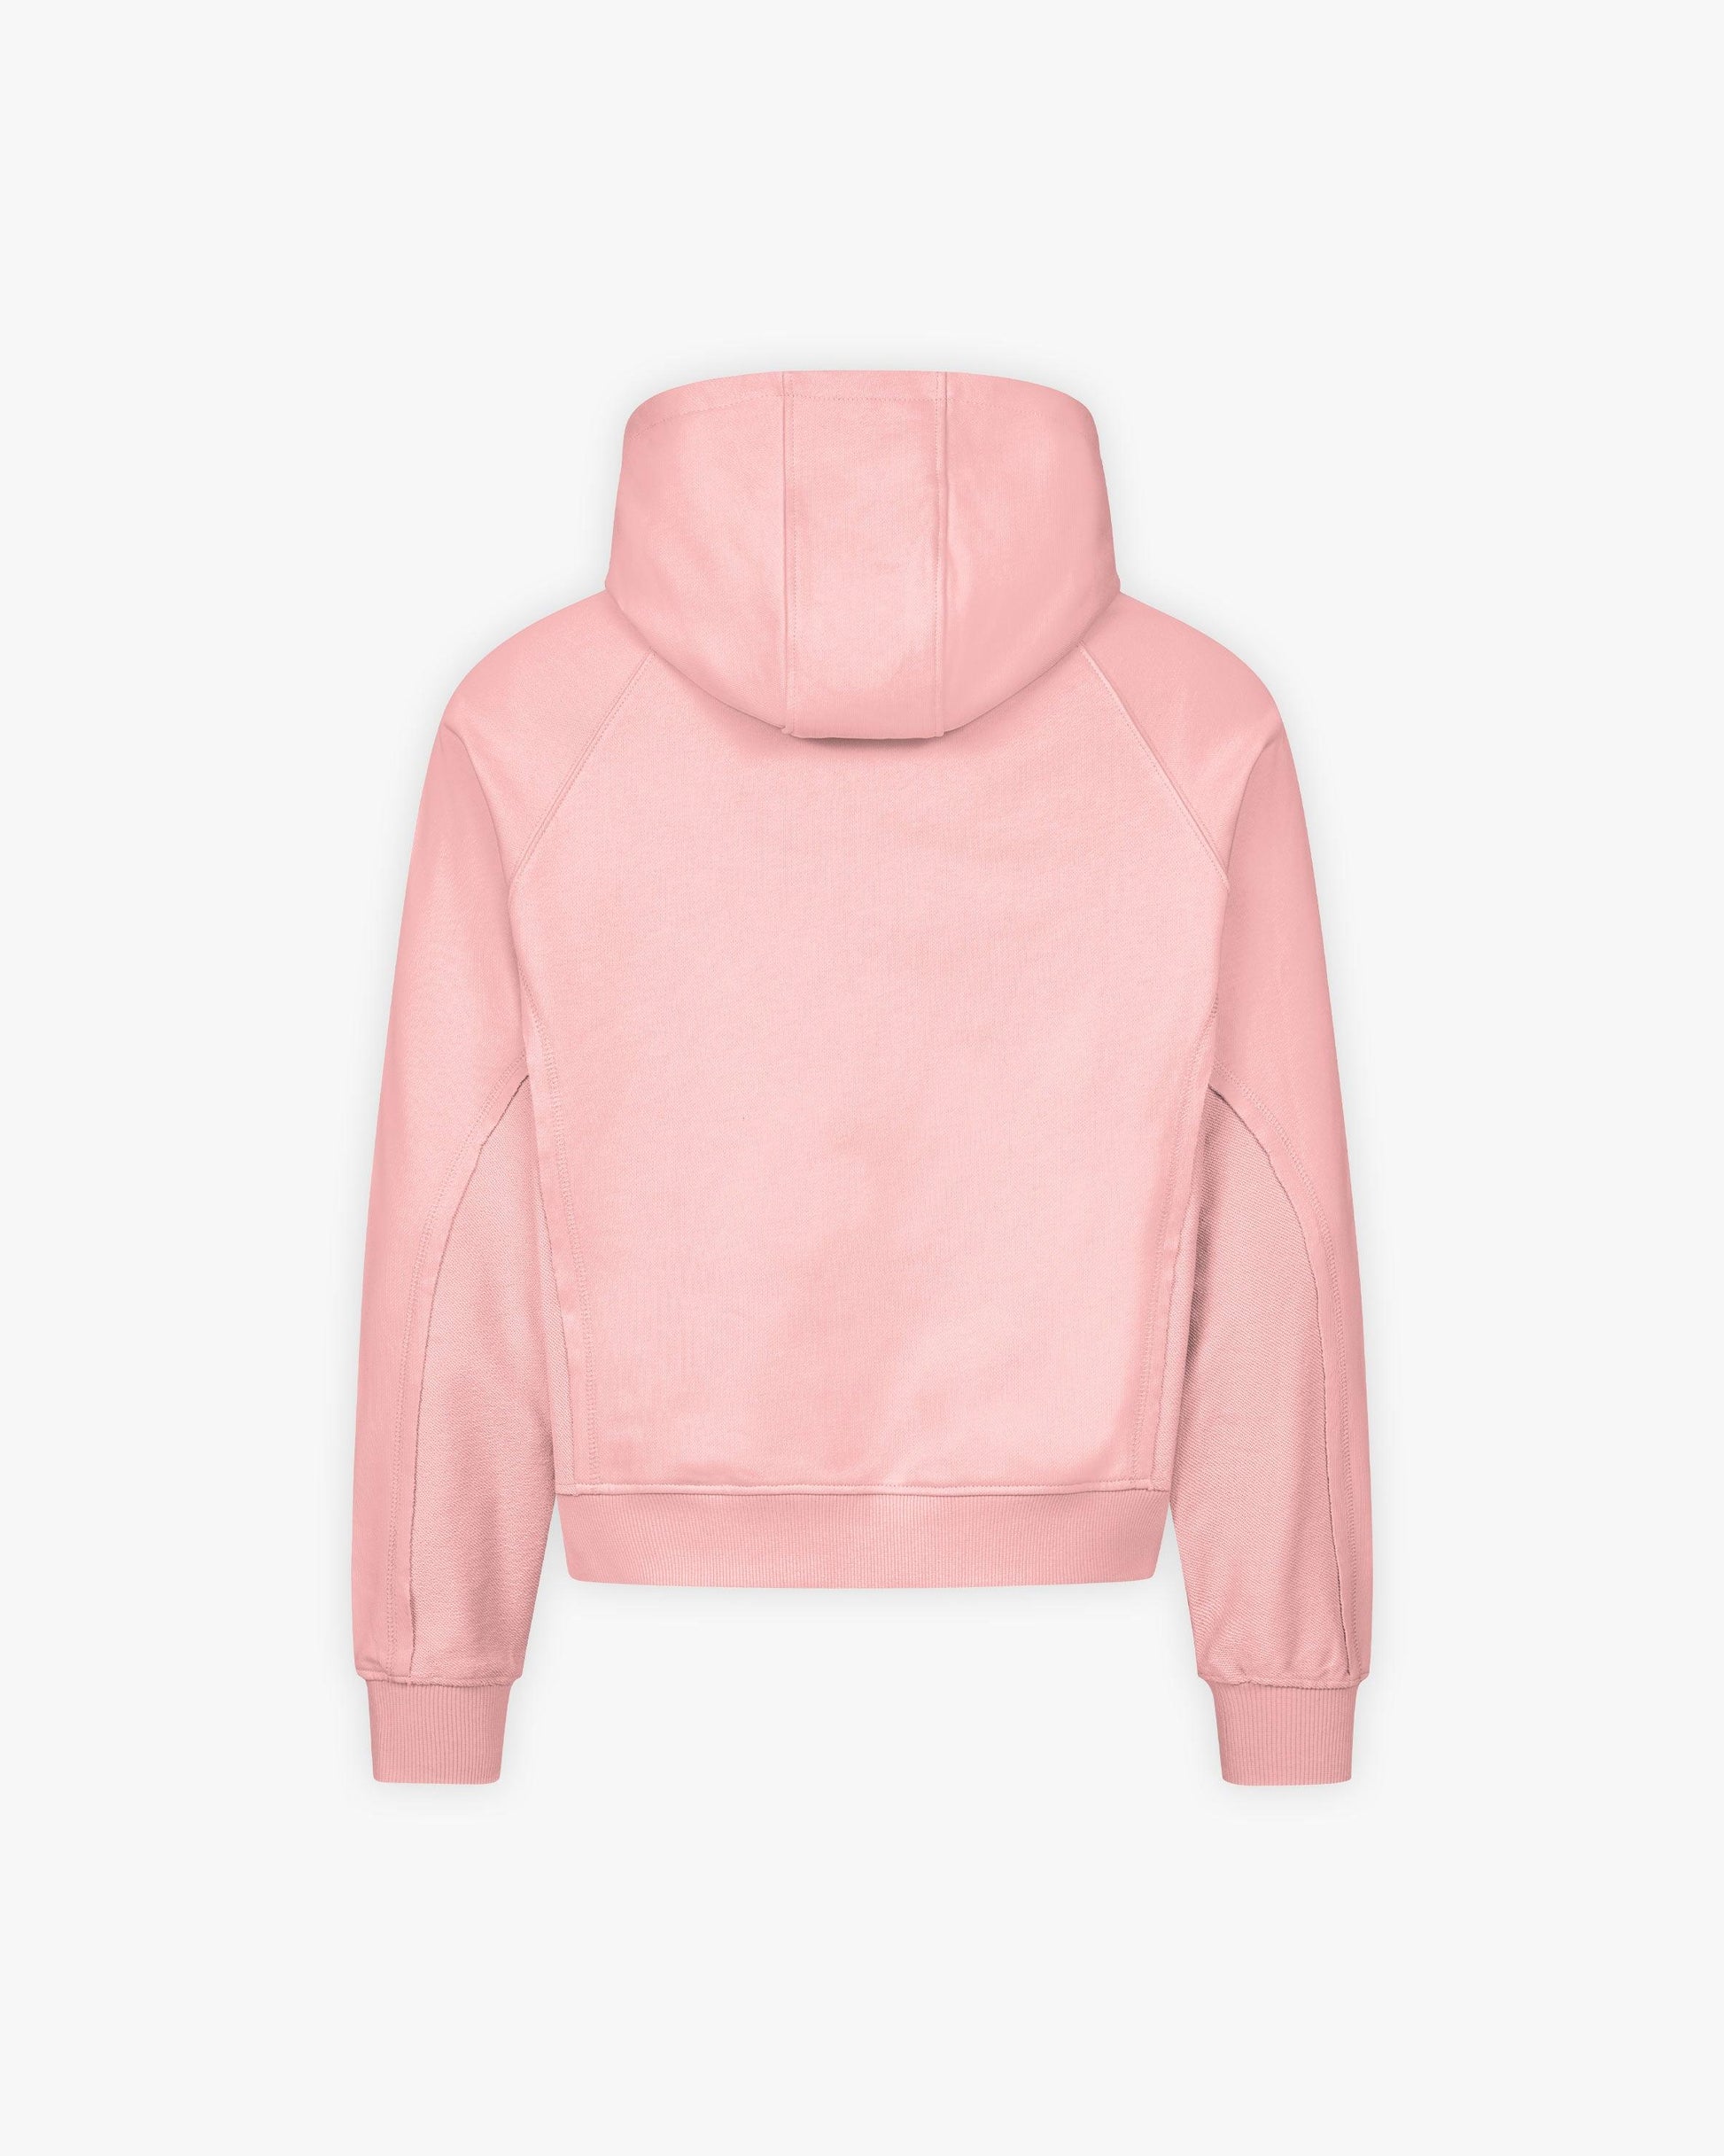 INSIDE OUT HOODIE PINK - VICINITY